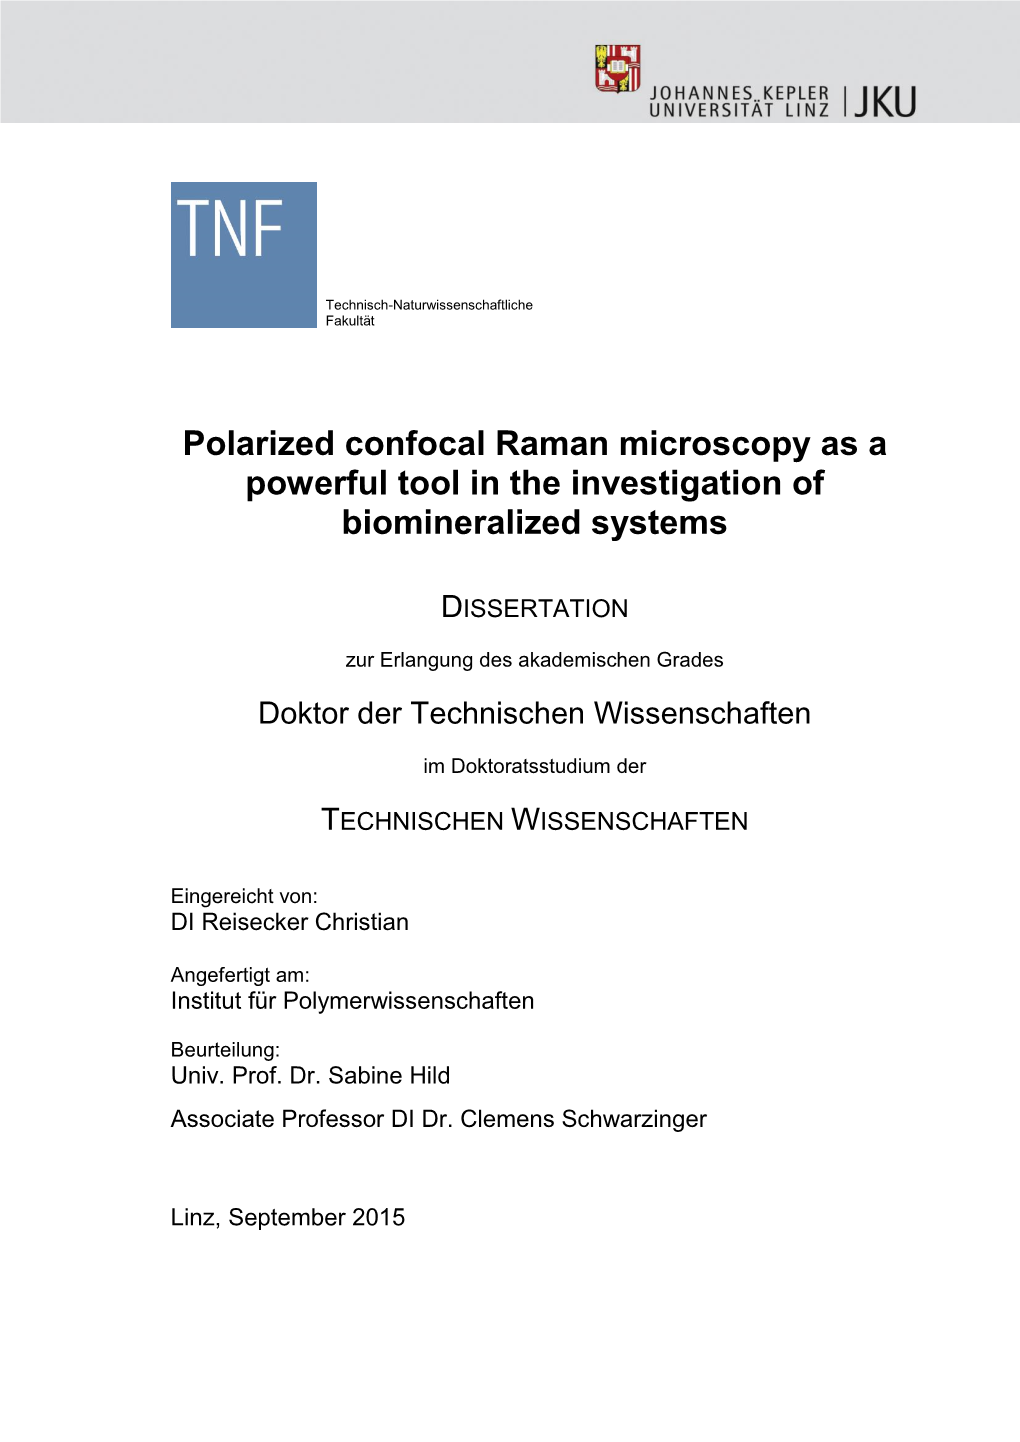 Polarized Confocal Raman Microscopy As a Powerful Tool in the Investigation of Biomineralized Systems